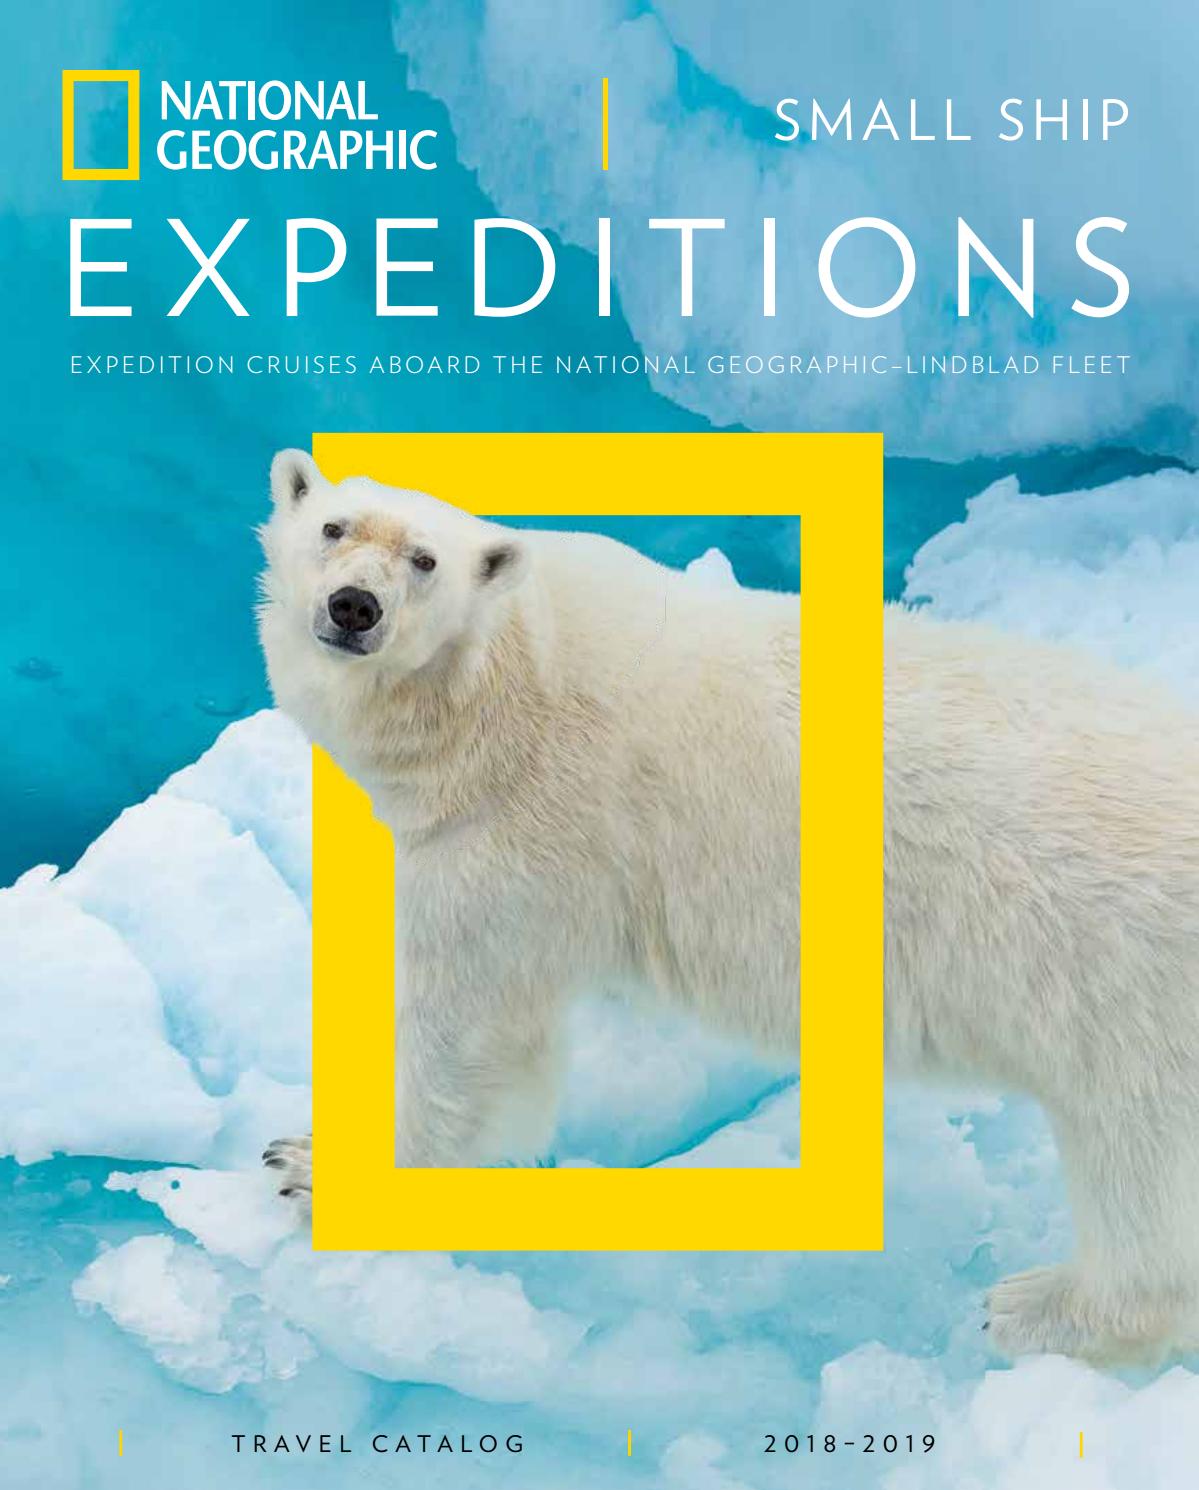 Download National Geographic Expeditions - Small Ship Catalog 2018/19